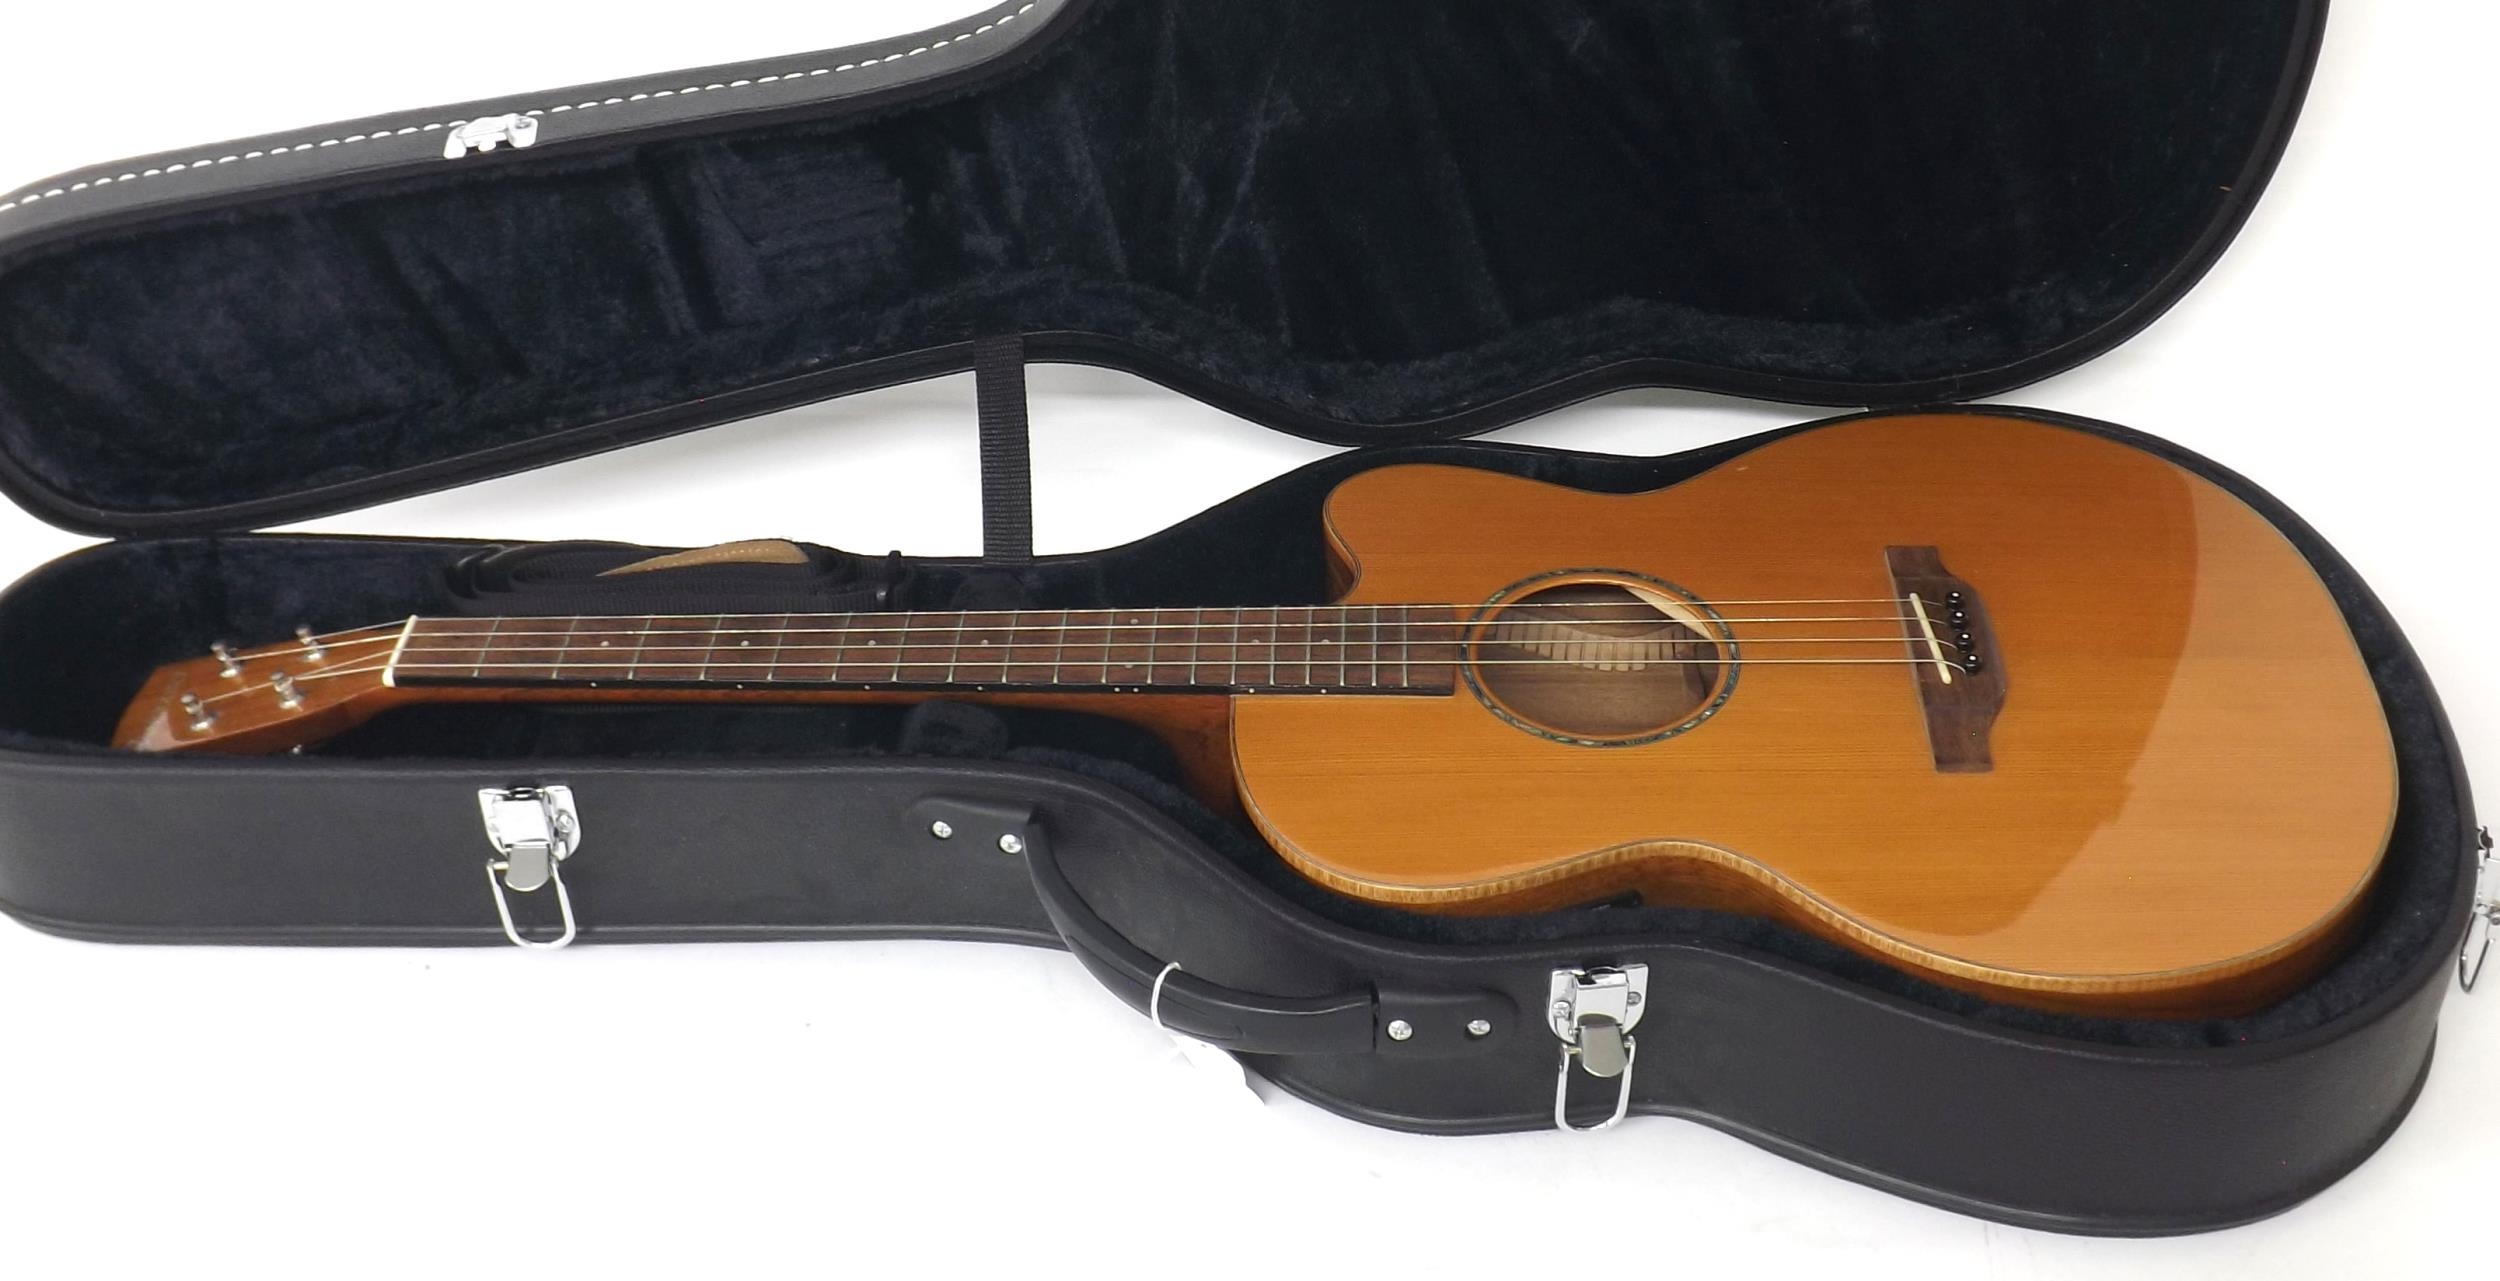 Contemporary classical guitar by and labelled Ashbury, model no: Lindisfarne, with cut-away shaped - Image 3 of 3